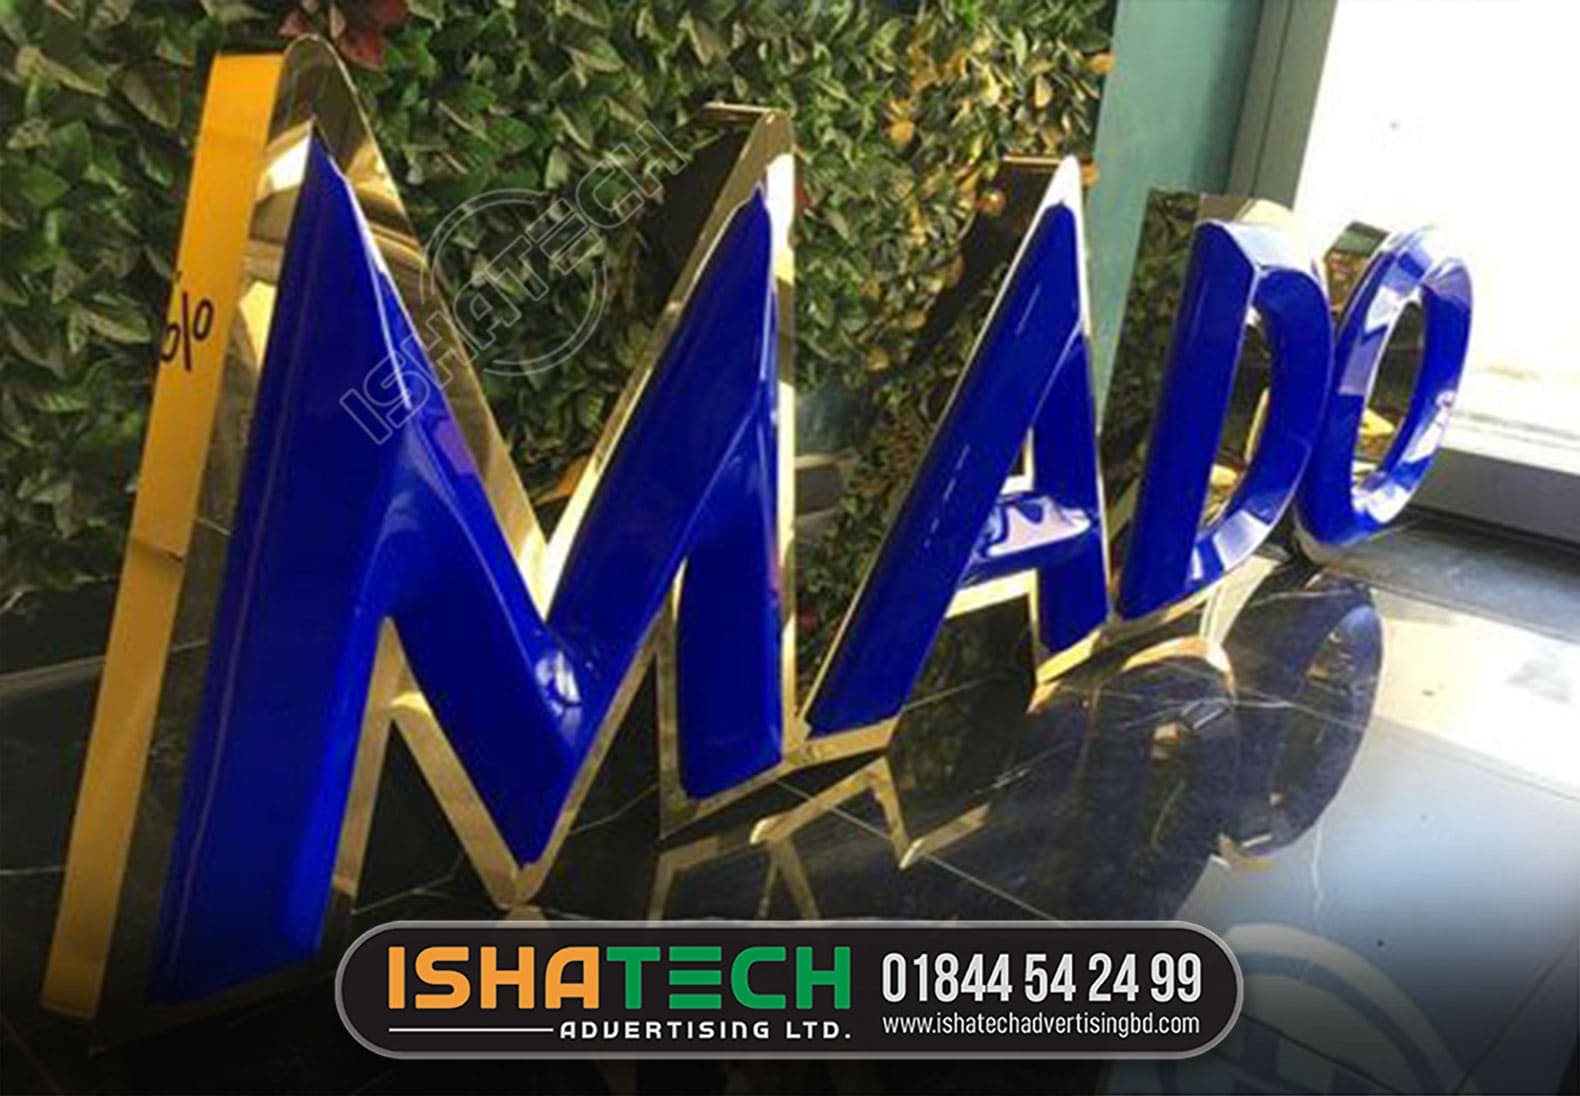 MADO SS LETETR NAME SIGNS, BEST LED SIGN BD, LETTER MAKING COMPANY IN DHAKA BD